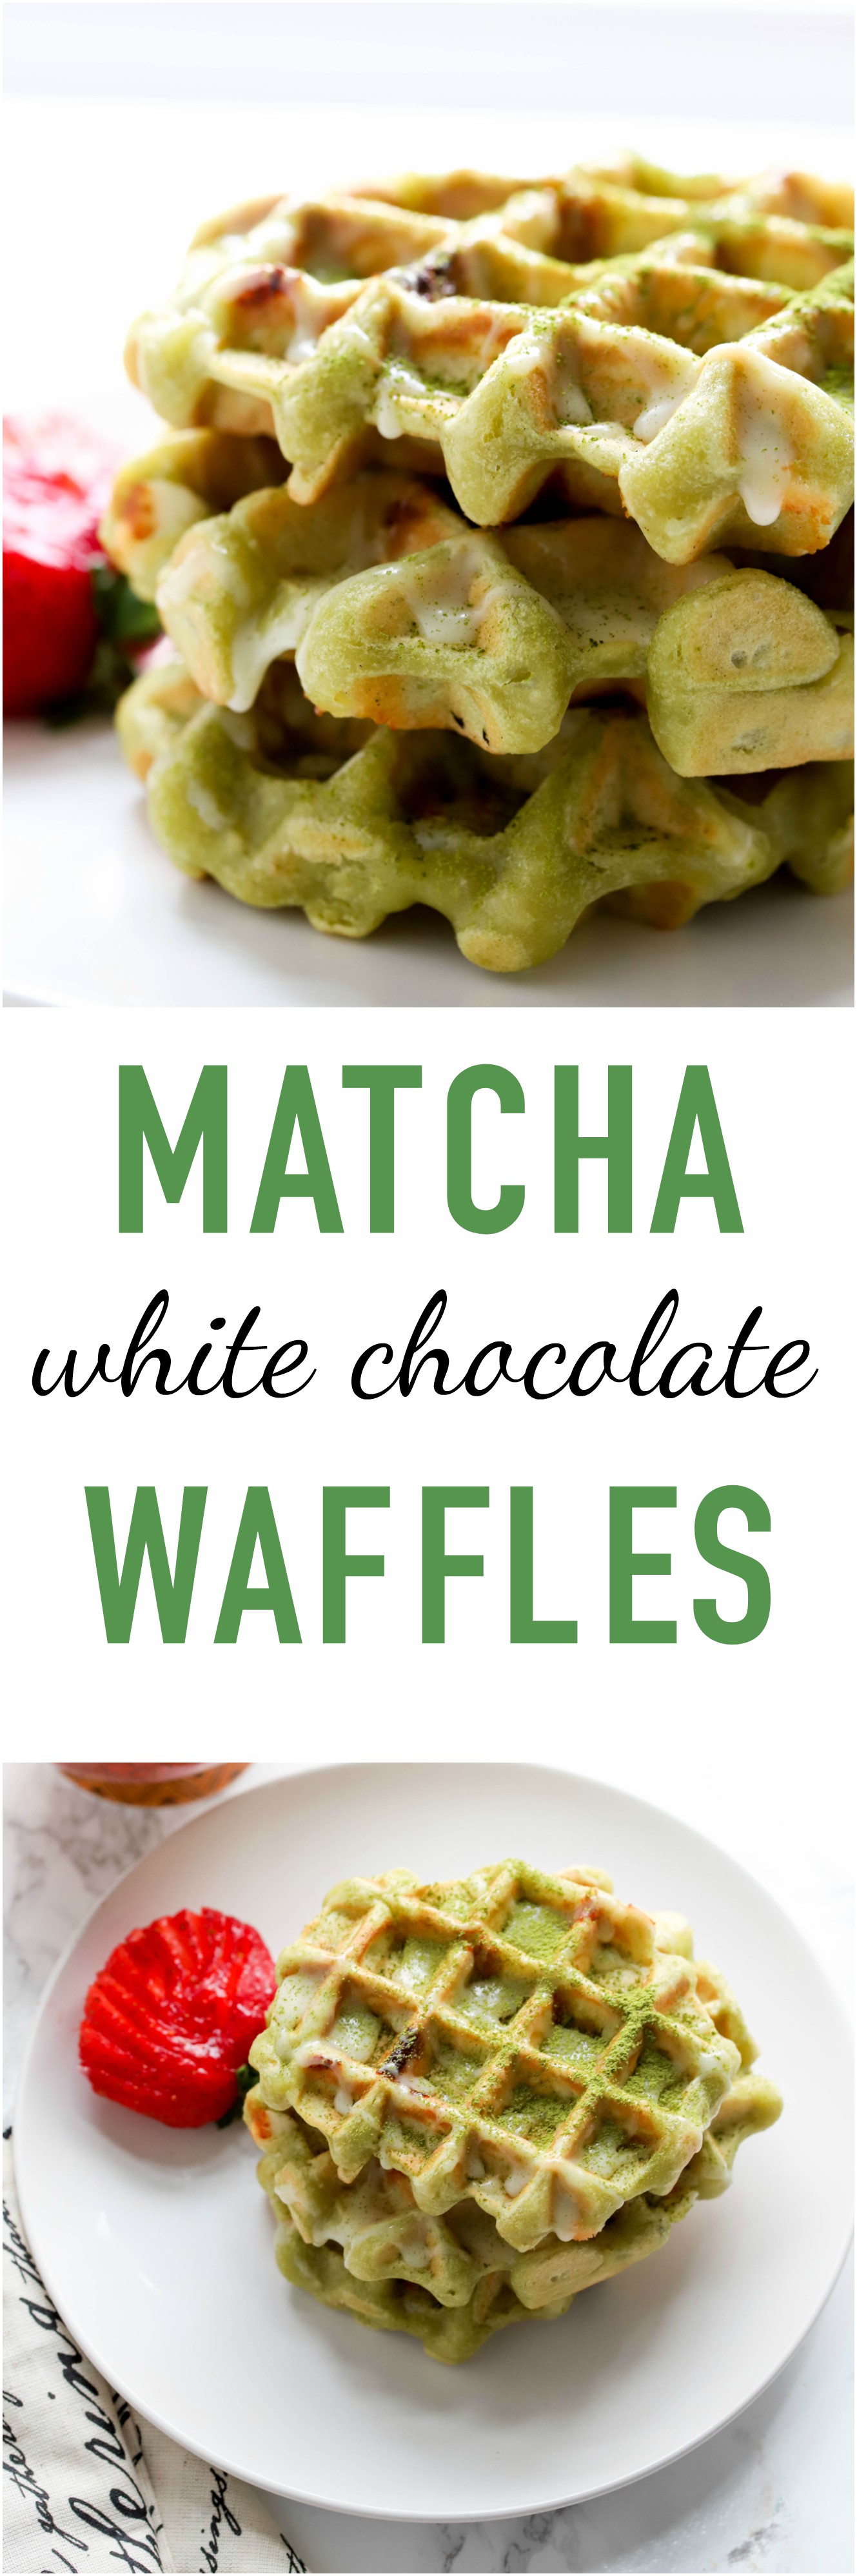 Matcha White Chocolate Waffles are almost vegan and totally decadent to make your morning special! There is a hint of matcha flavor in every bite and pairs beautifully with white chocolate chips!